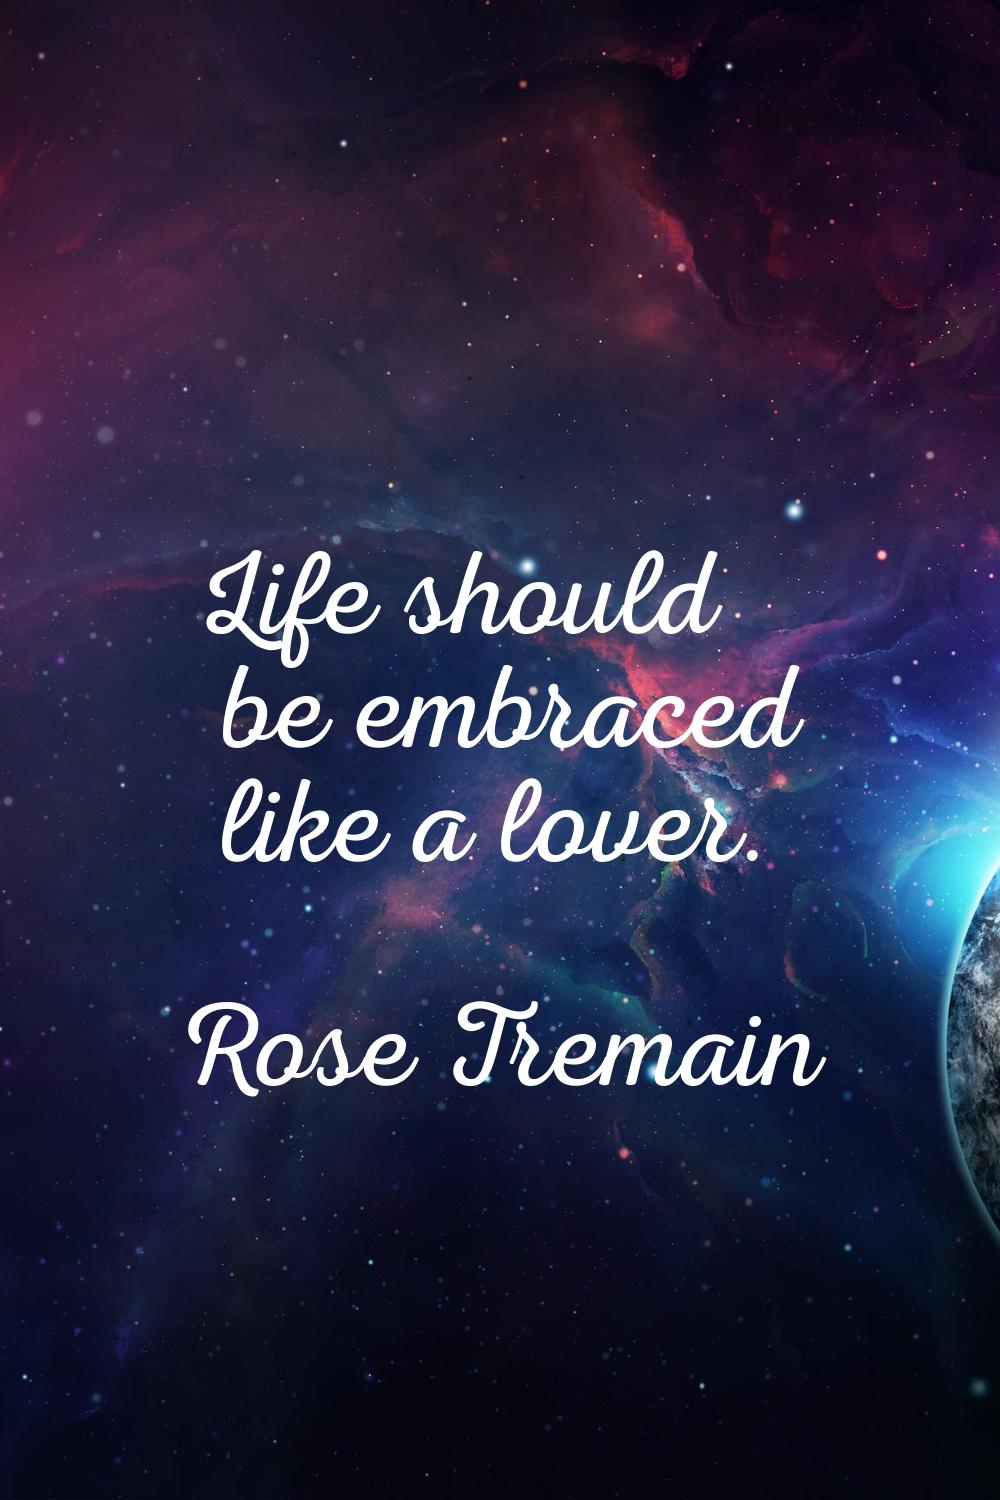 Life should be embraced like a lover.